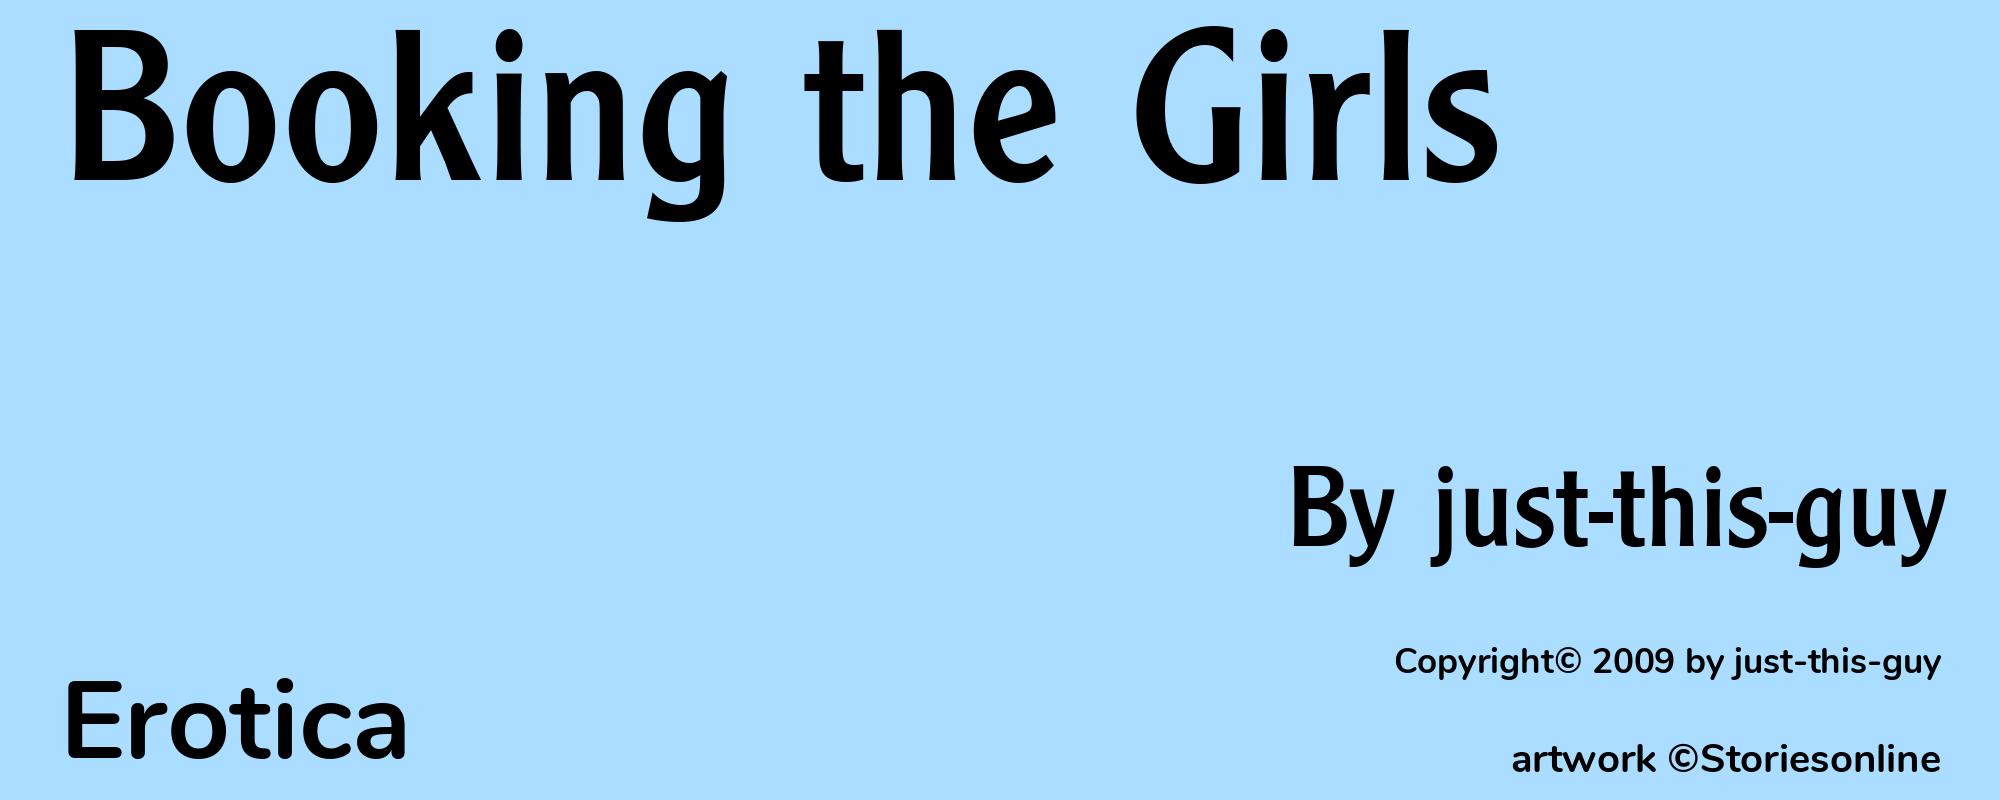 Booking the Girls - Cover